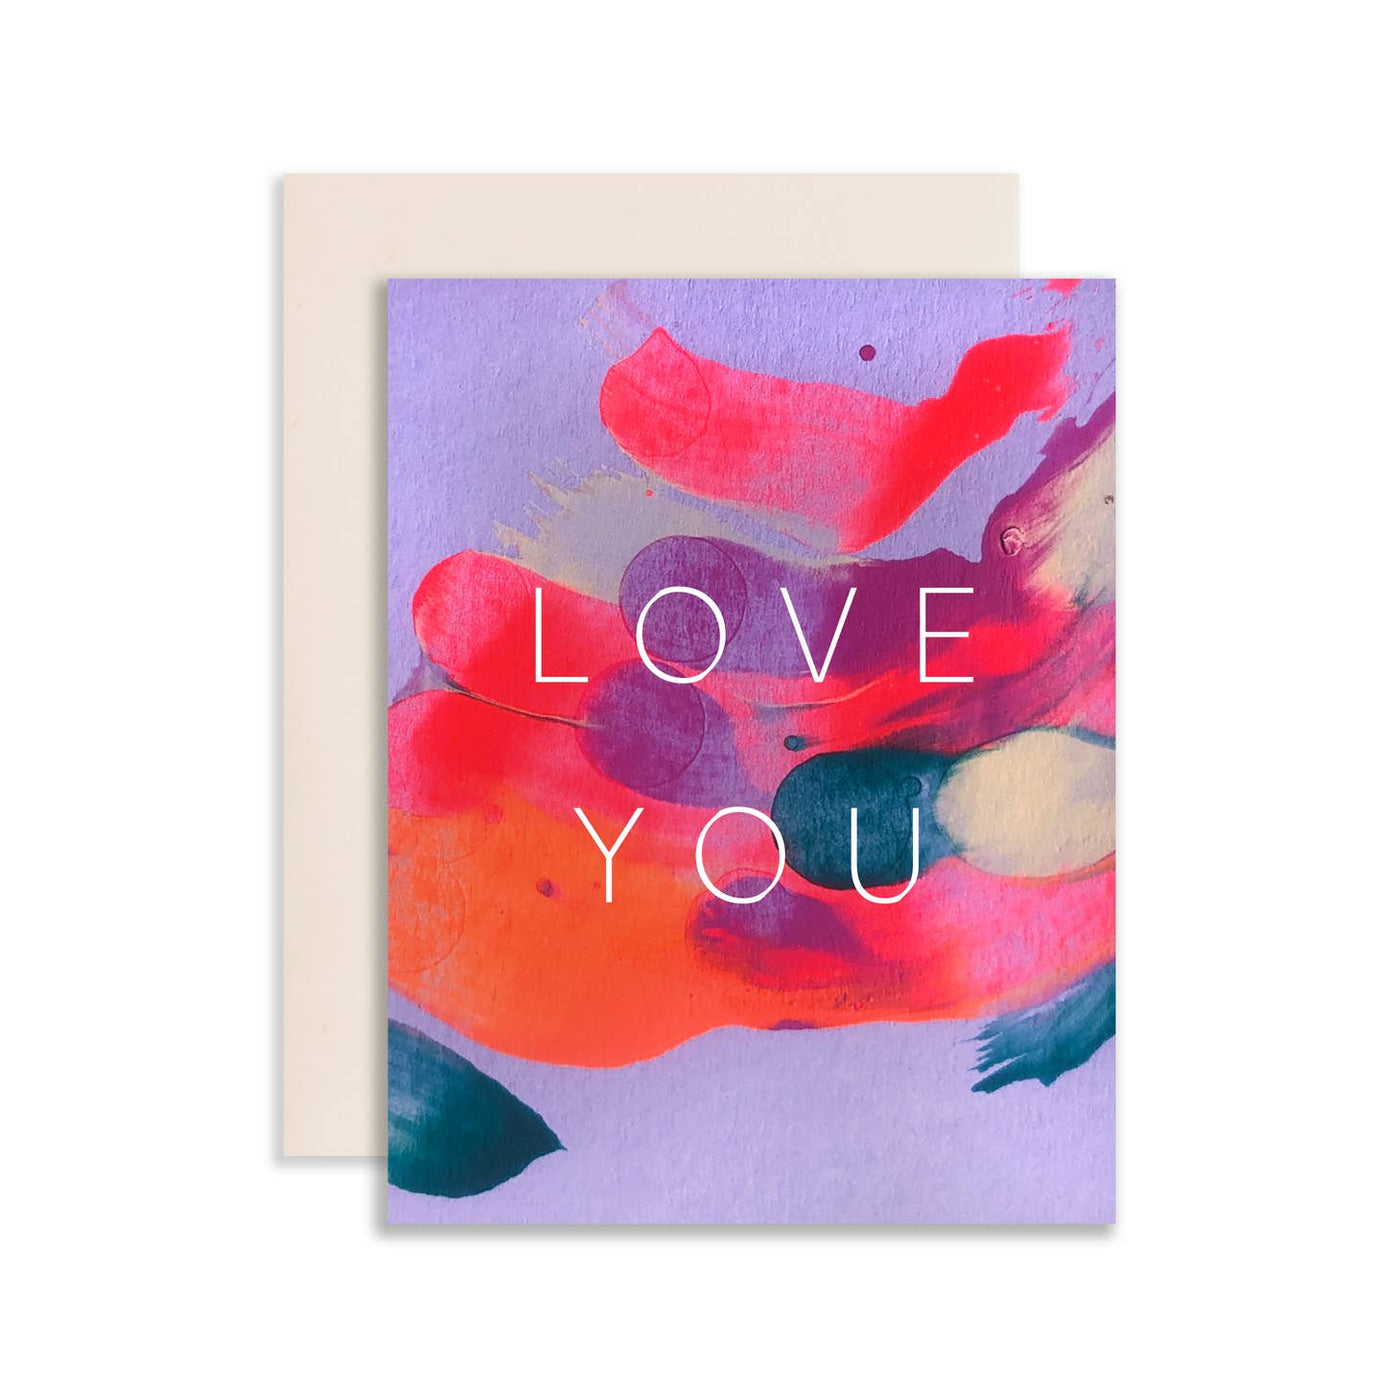 love you hand-painted greeting card